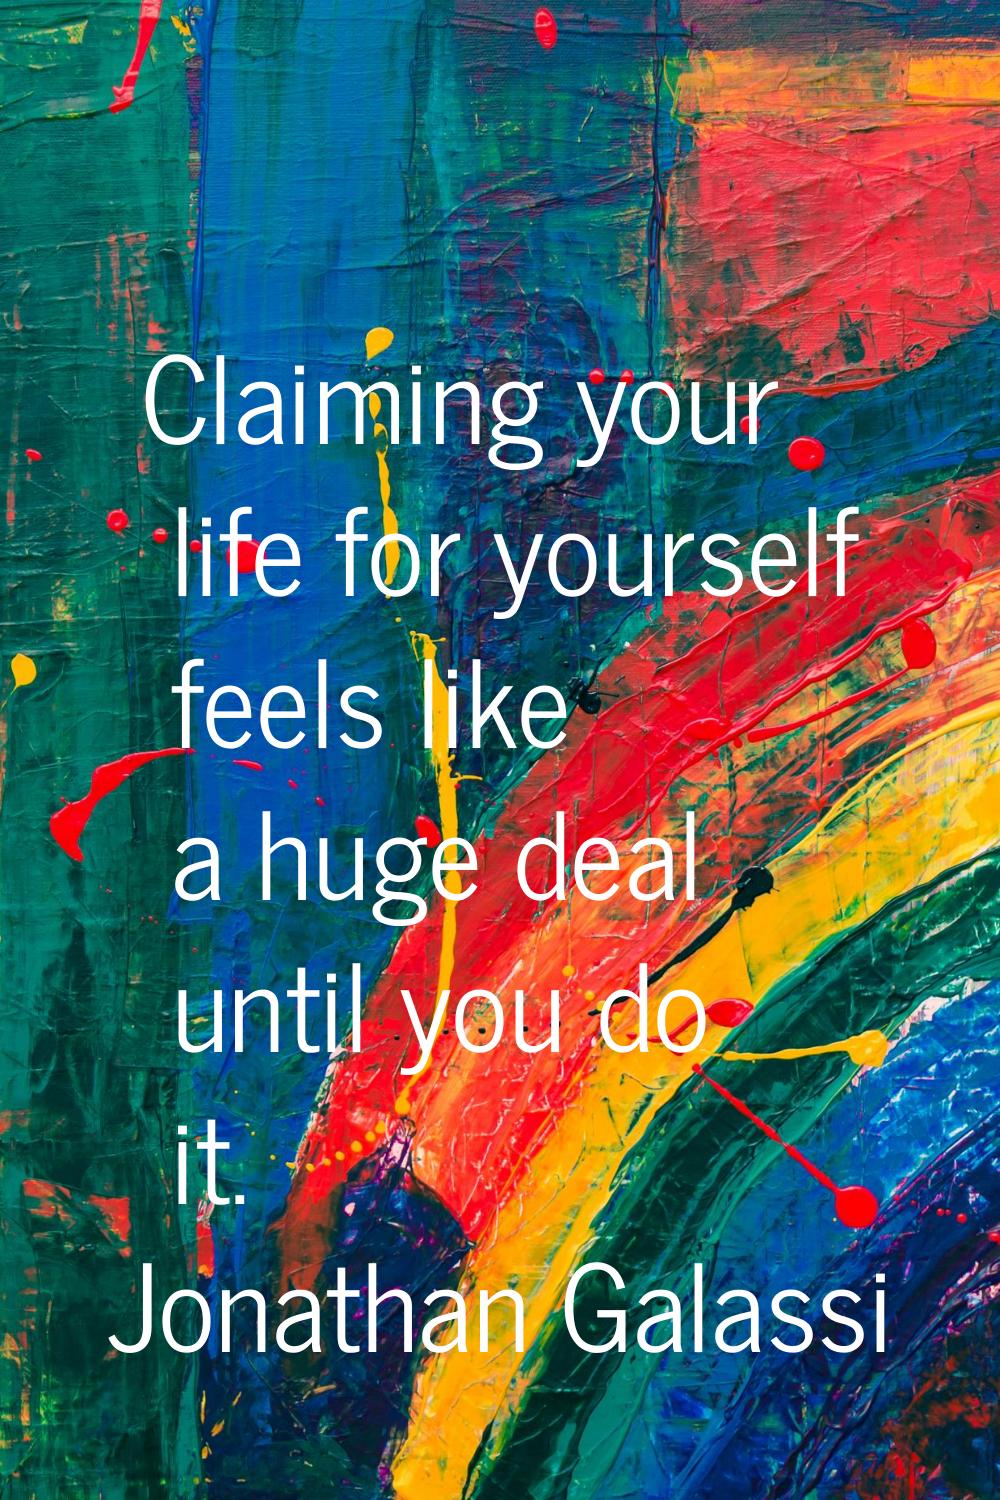 Claiming your life for yourself feels like a huge deal until you do it.